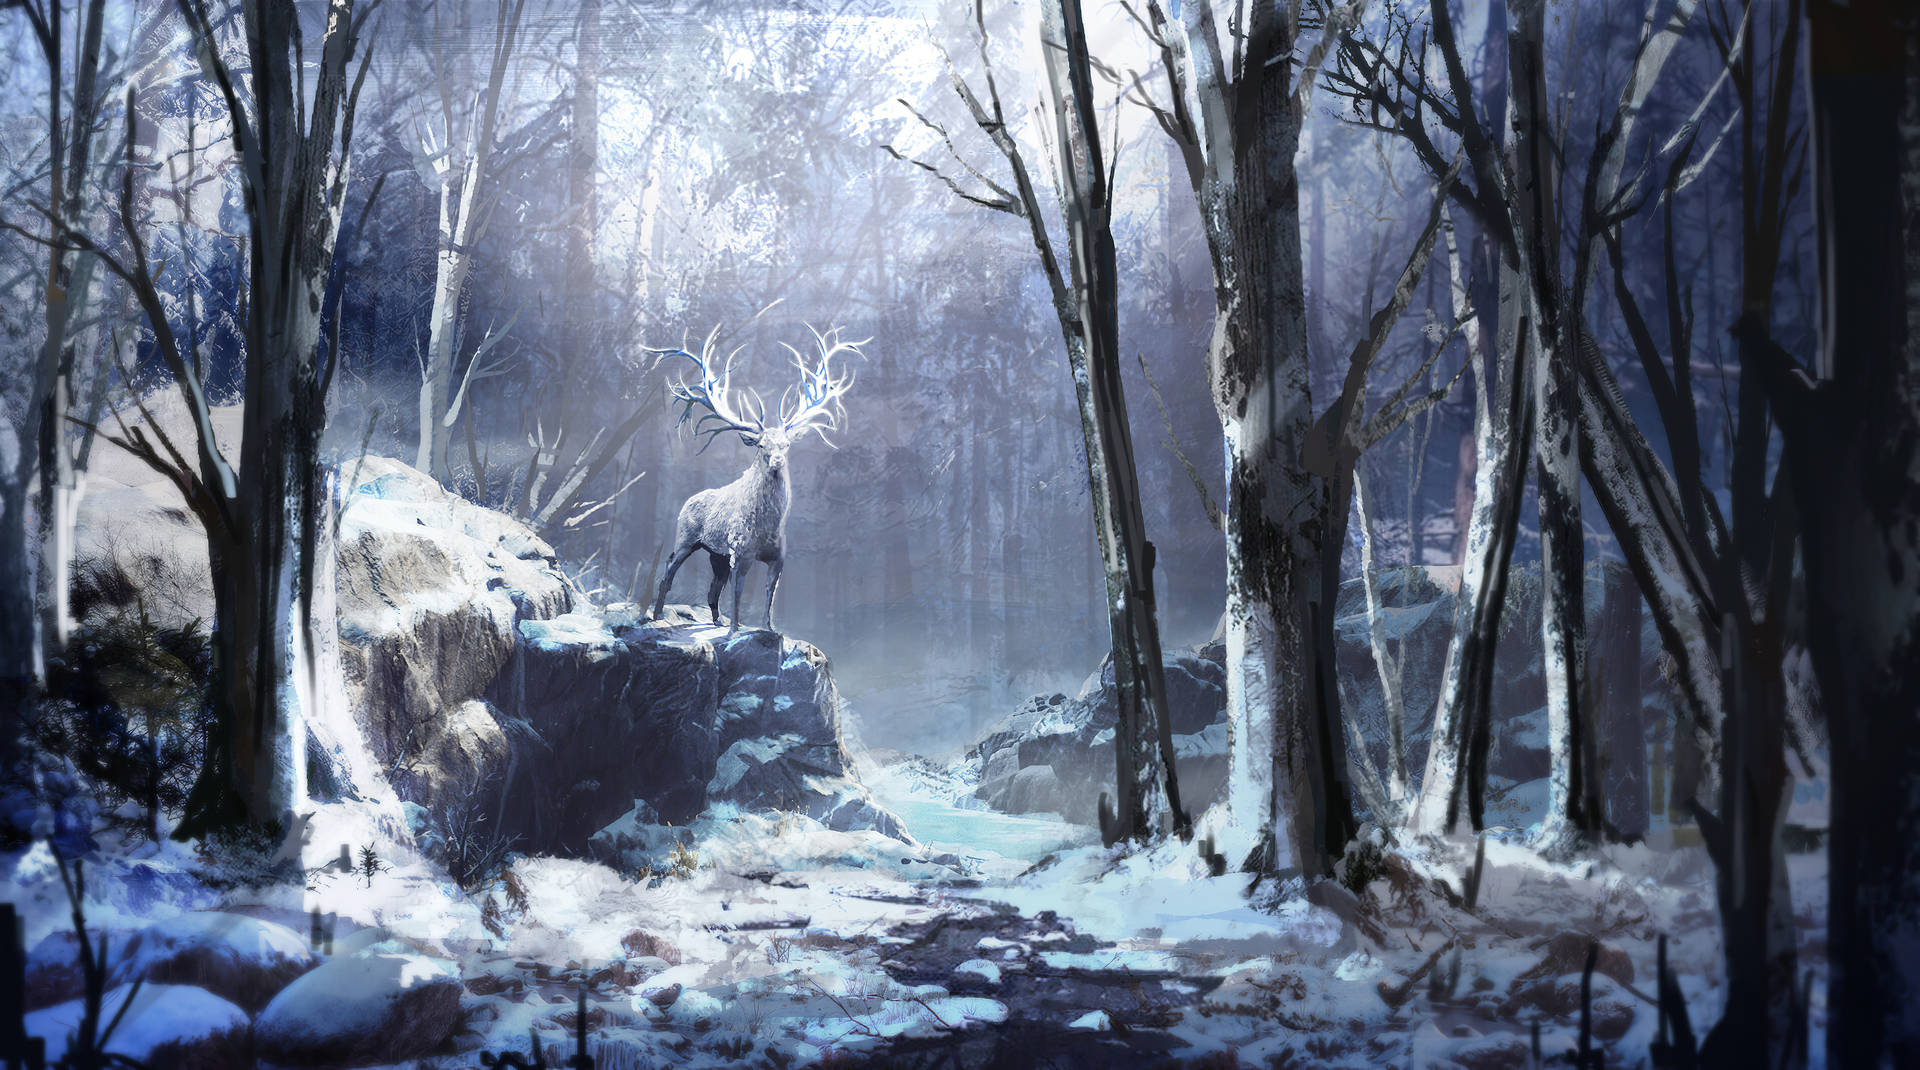 Reindeer In The Forest Wallpaper